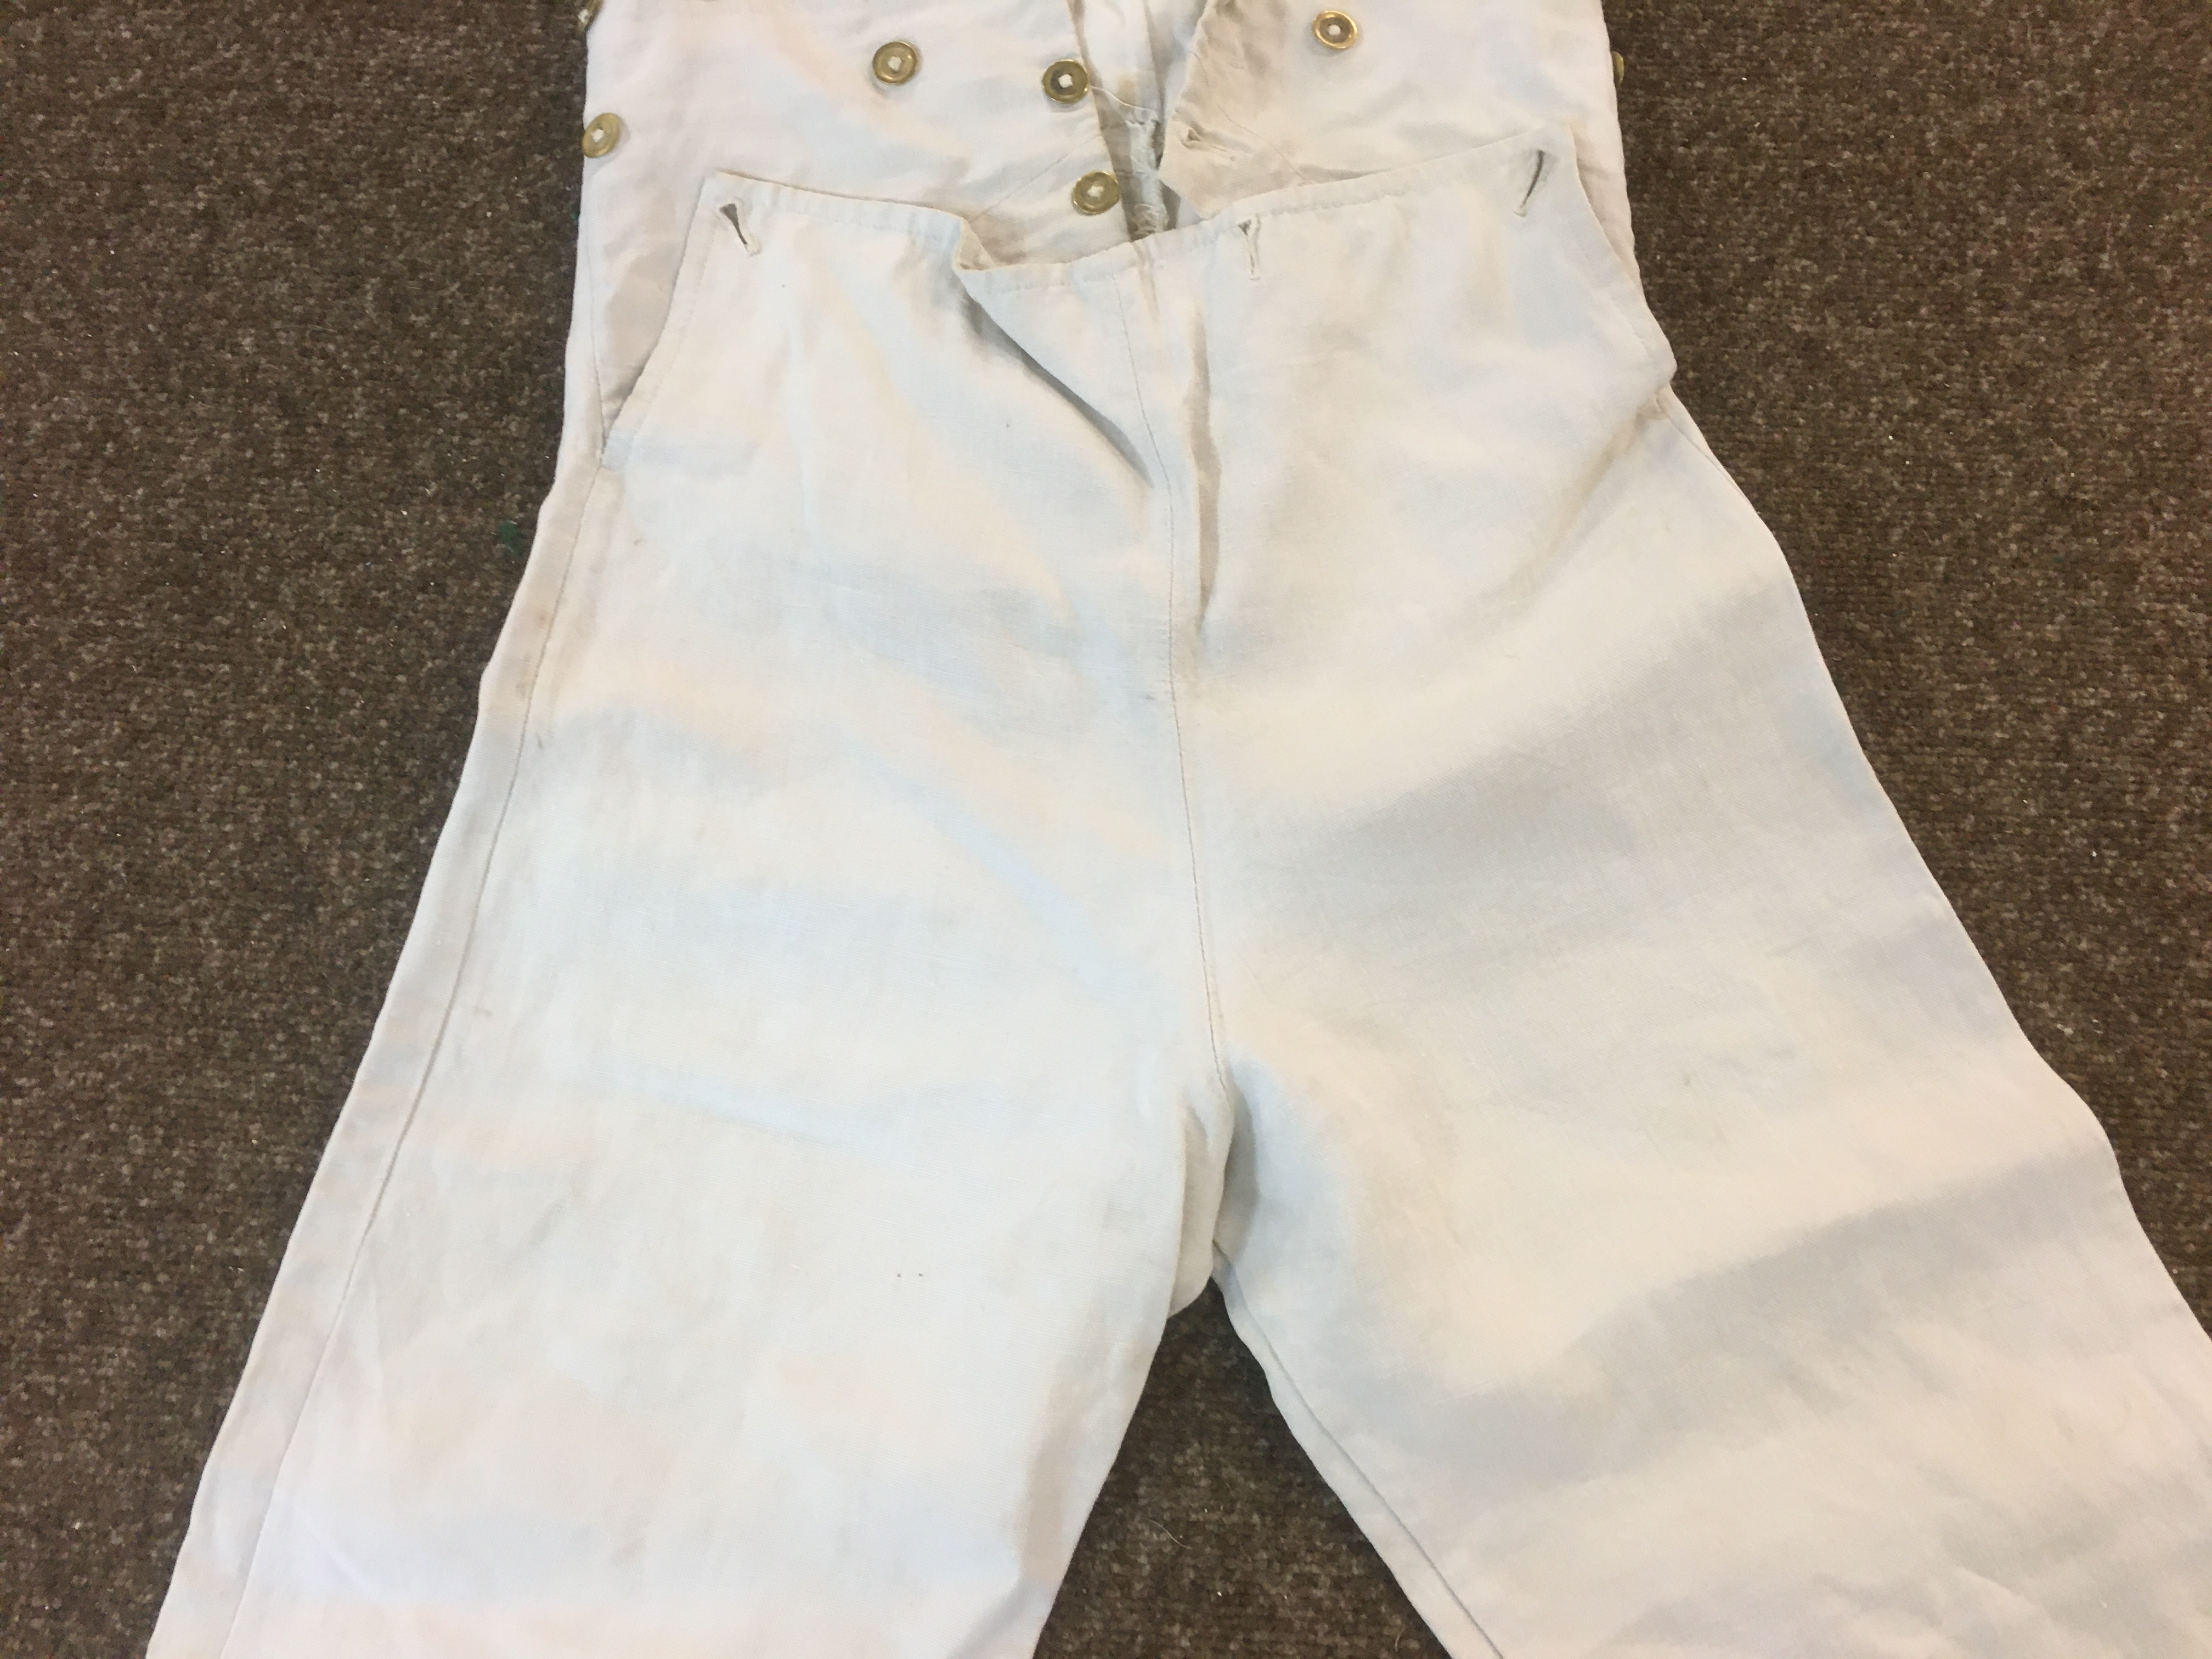 19THC GENTS TROUSERS a pair of cream linen gentleman's trousers with brass button fastening, also - Image 8 of 13